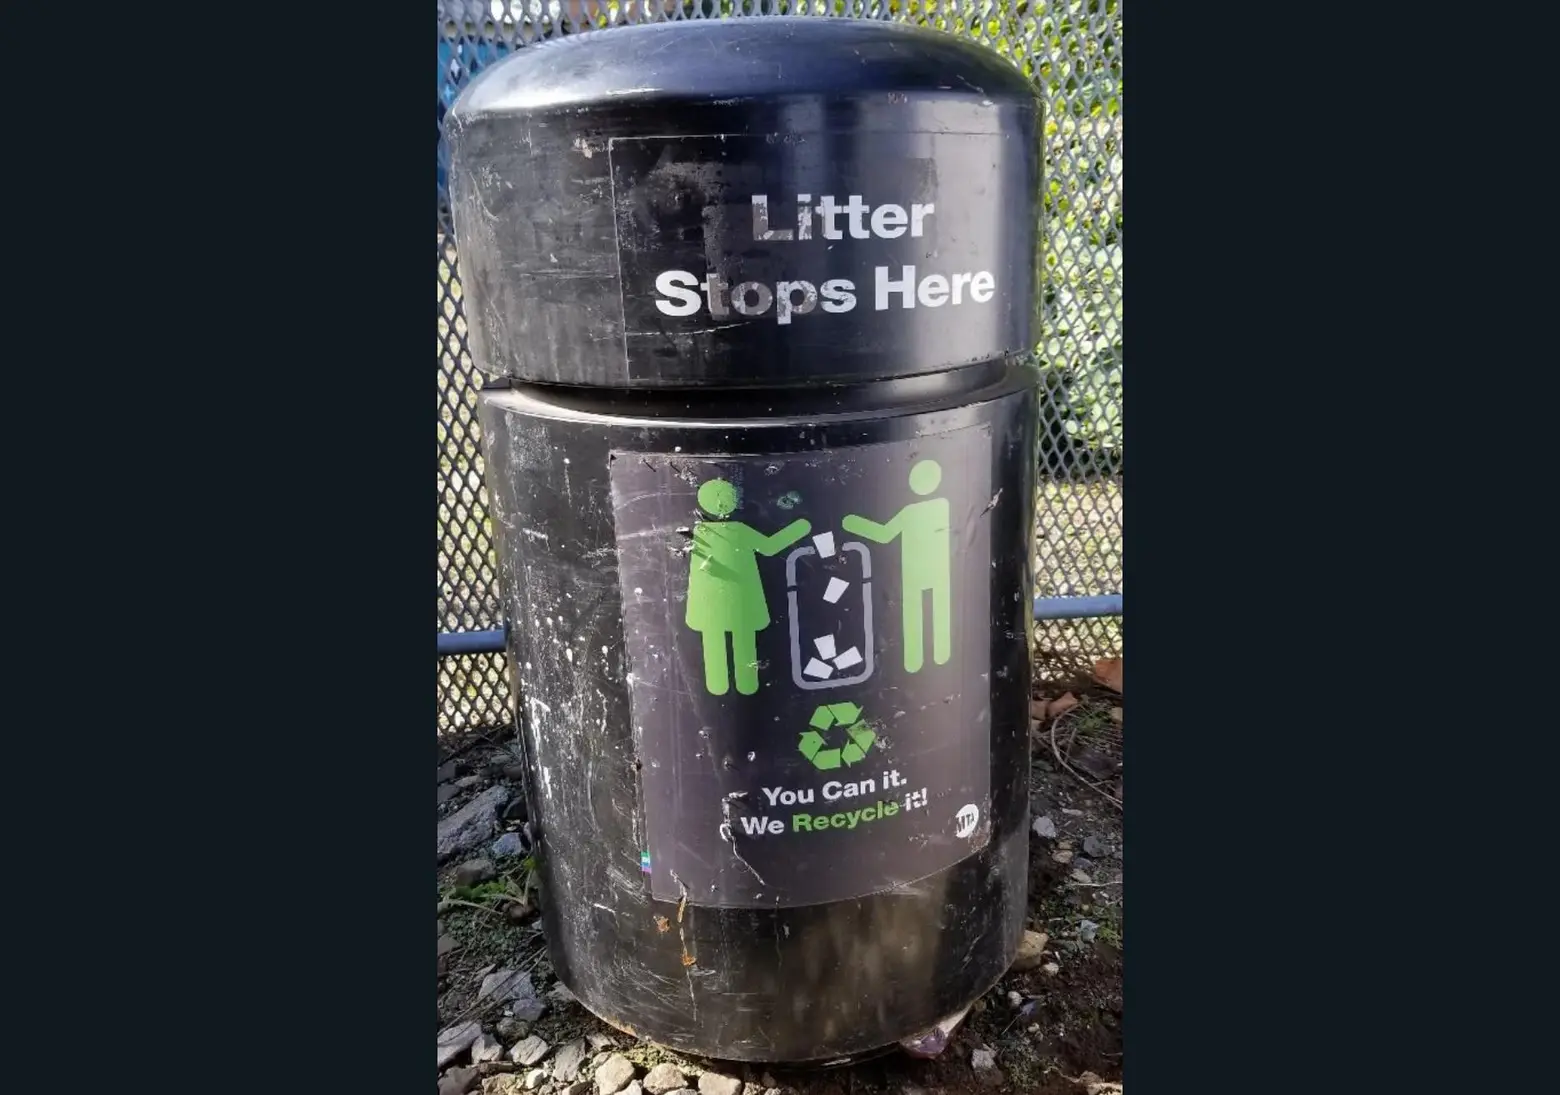 For $300, own a used subway trash can from the MTA